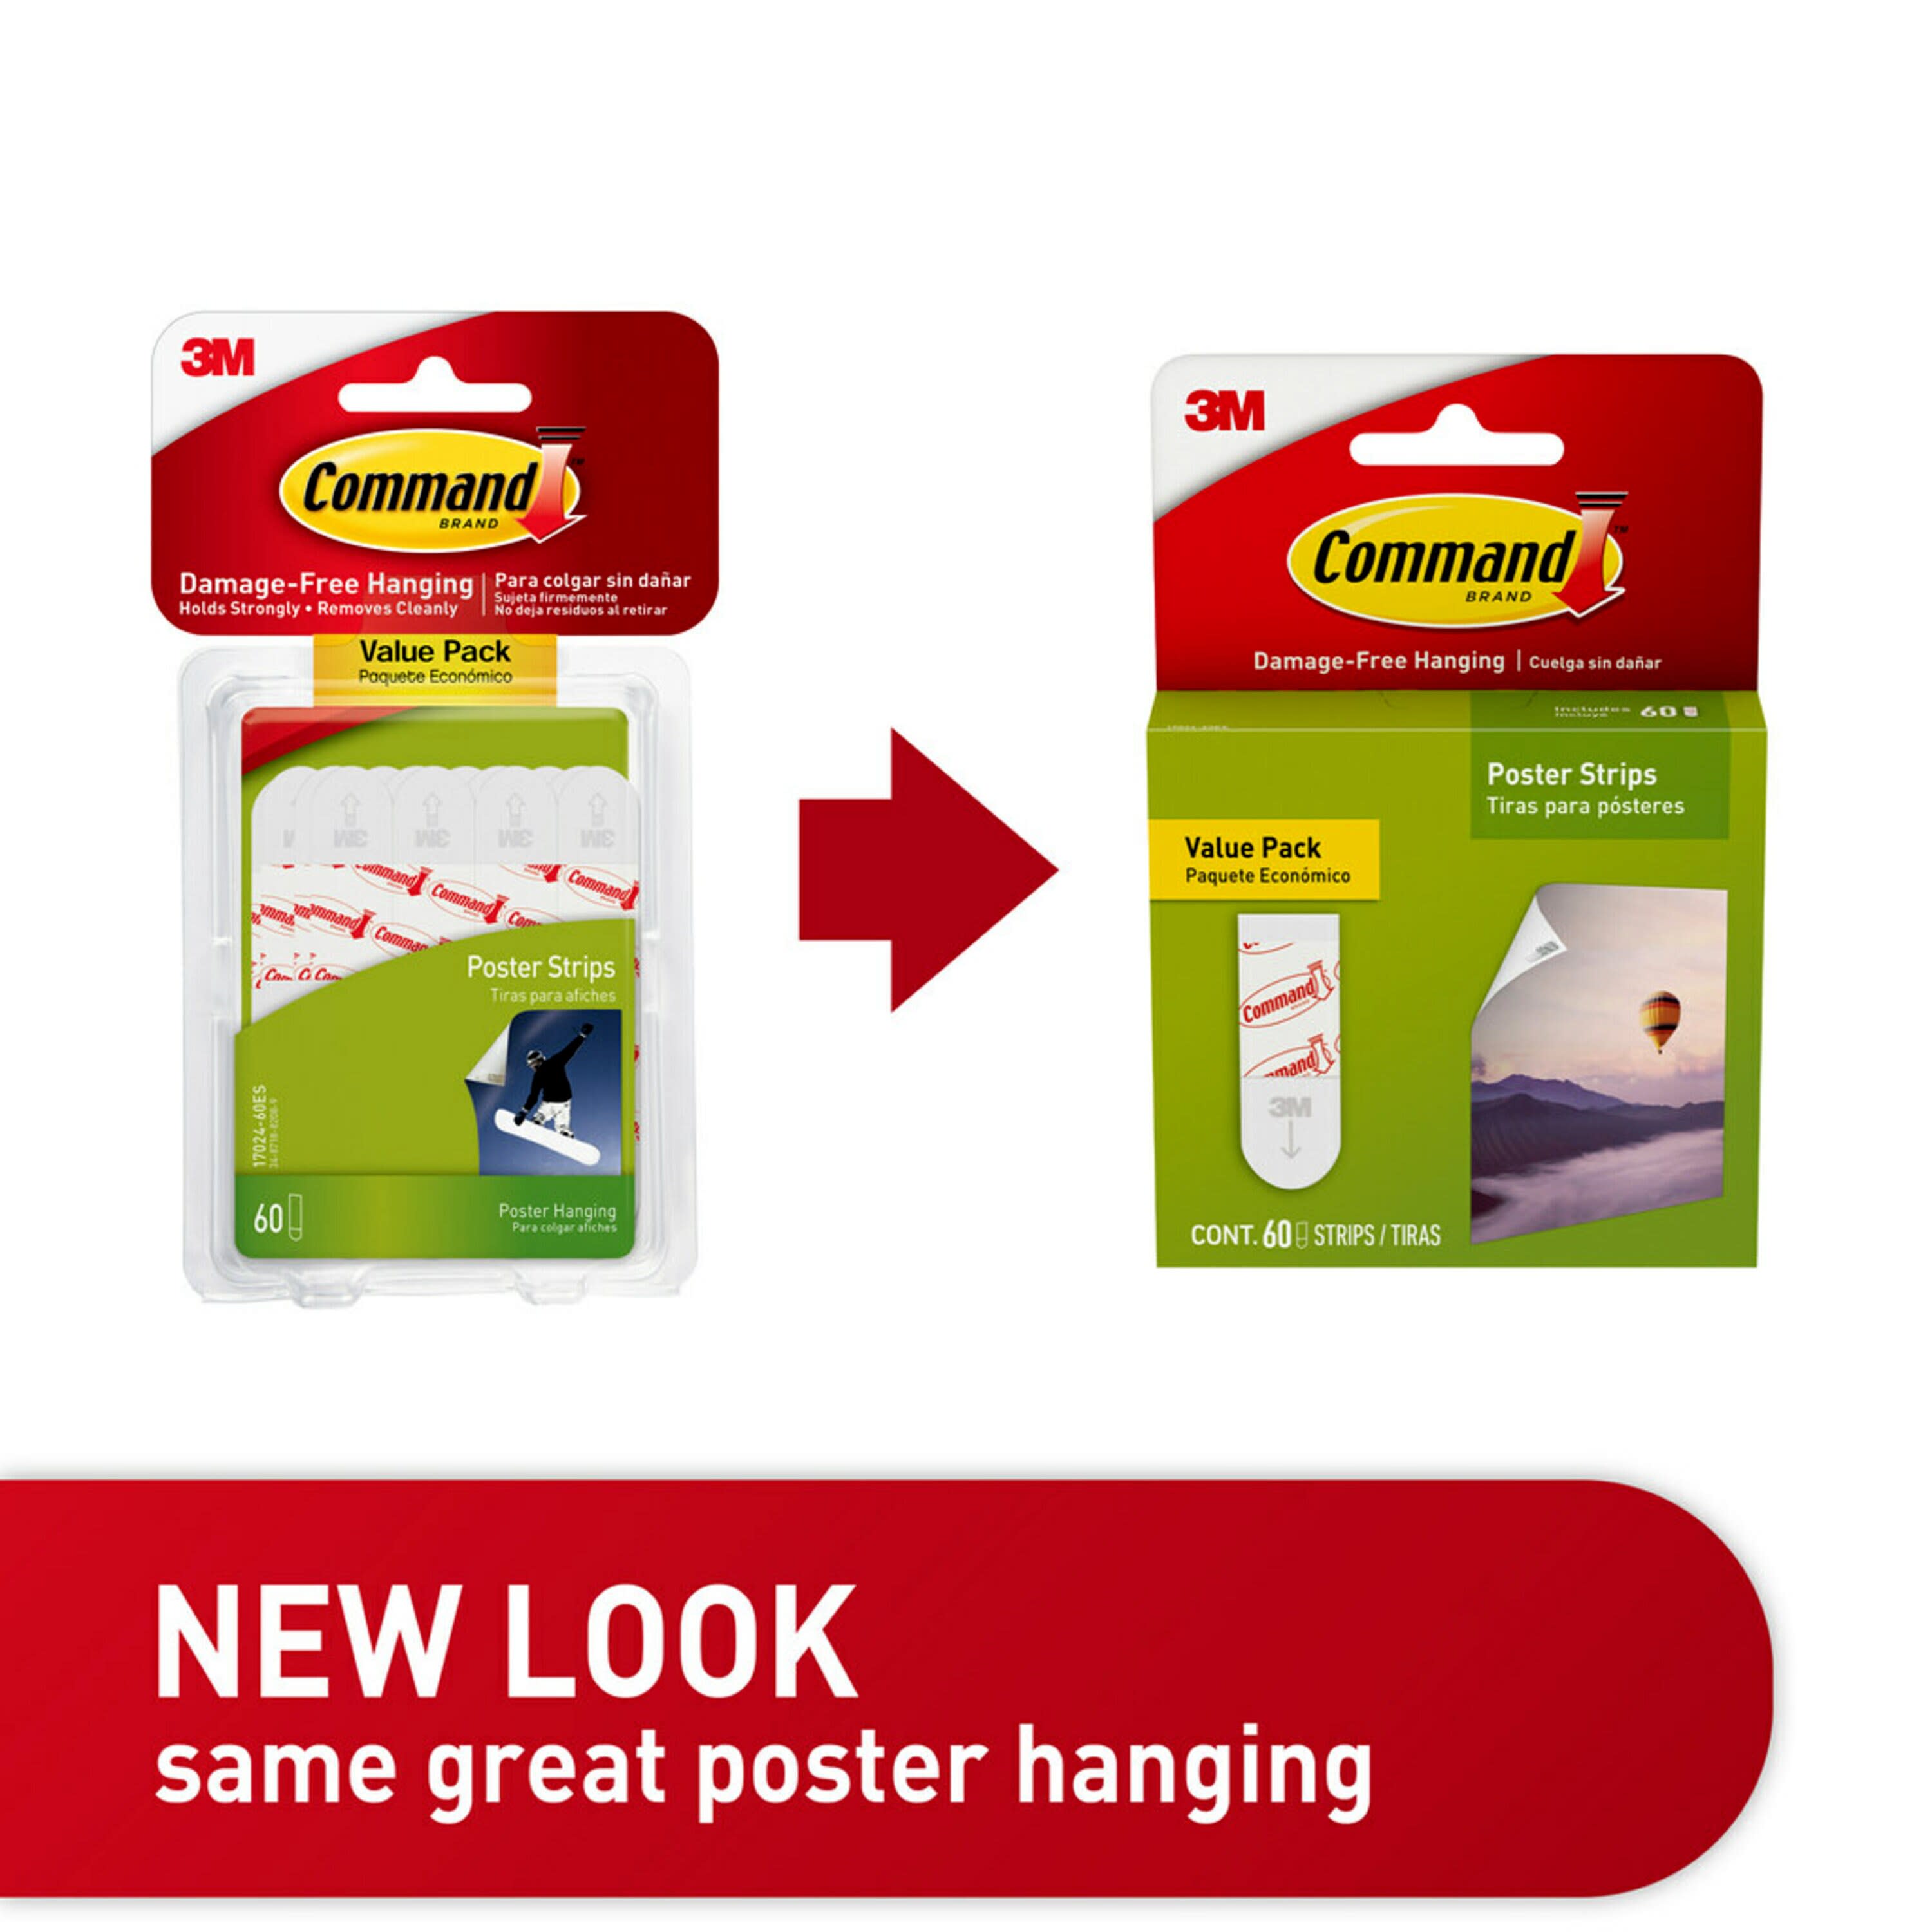 Command Poster Strips, White, Damage-Free Hanging, 60 Command Strips - image 4 of 13